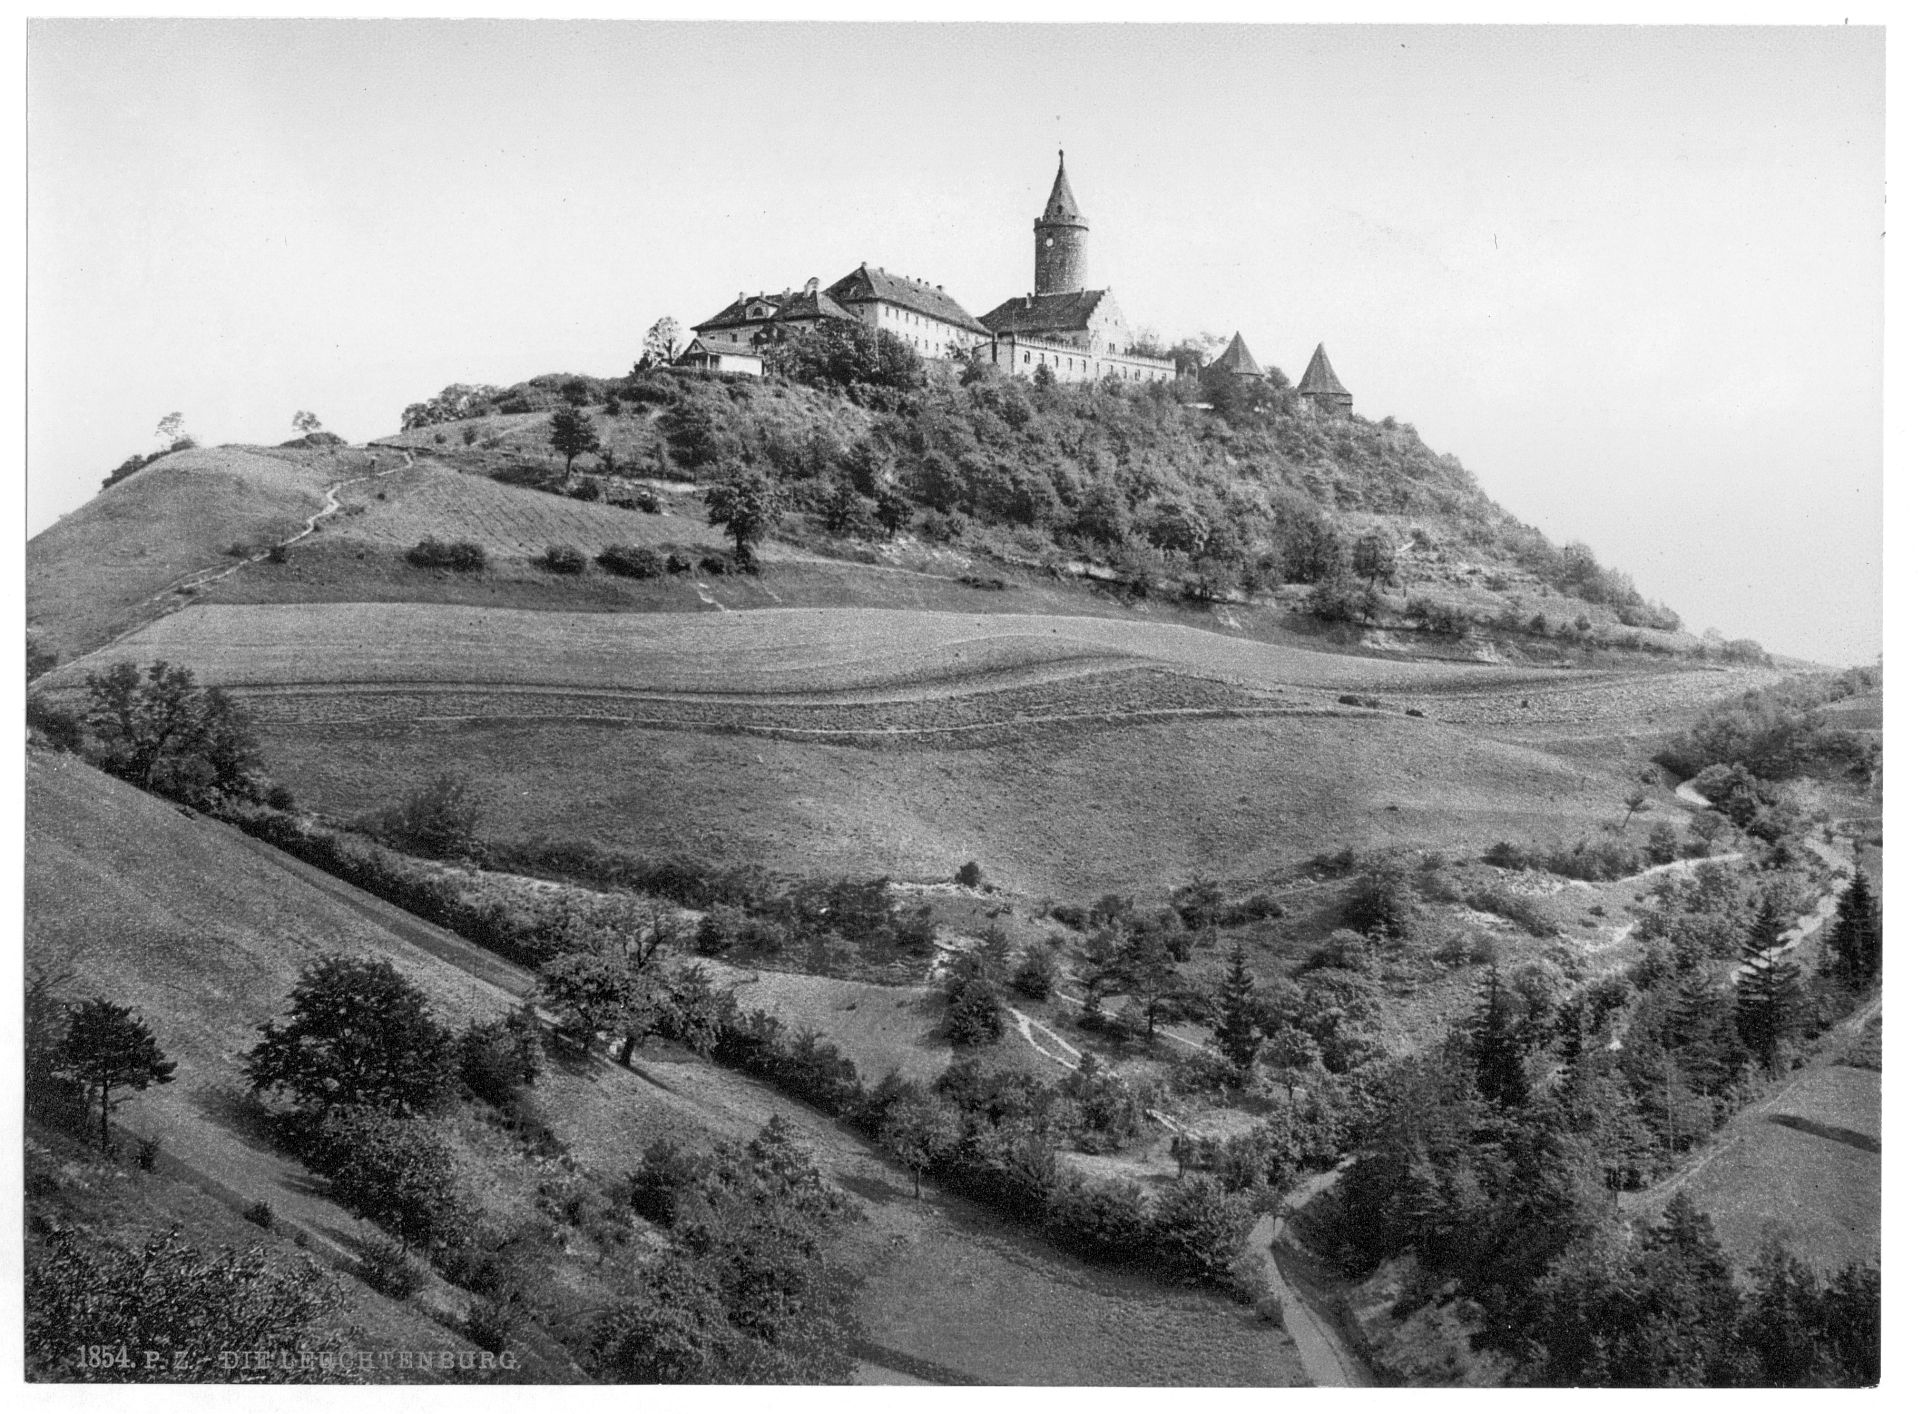 Kyffhauser and Monument from Gitenkopf, Thuringia, Germany